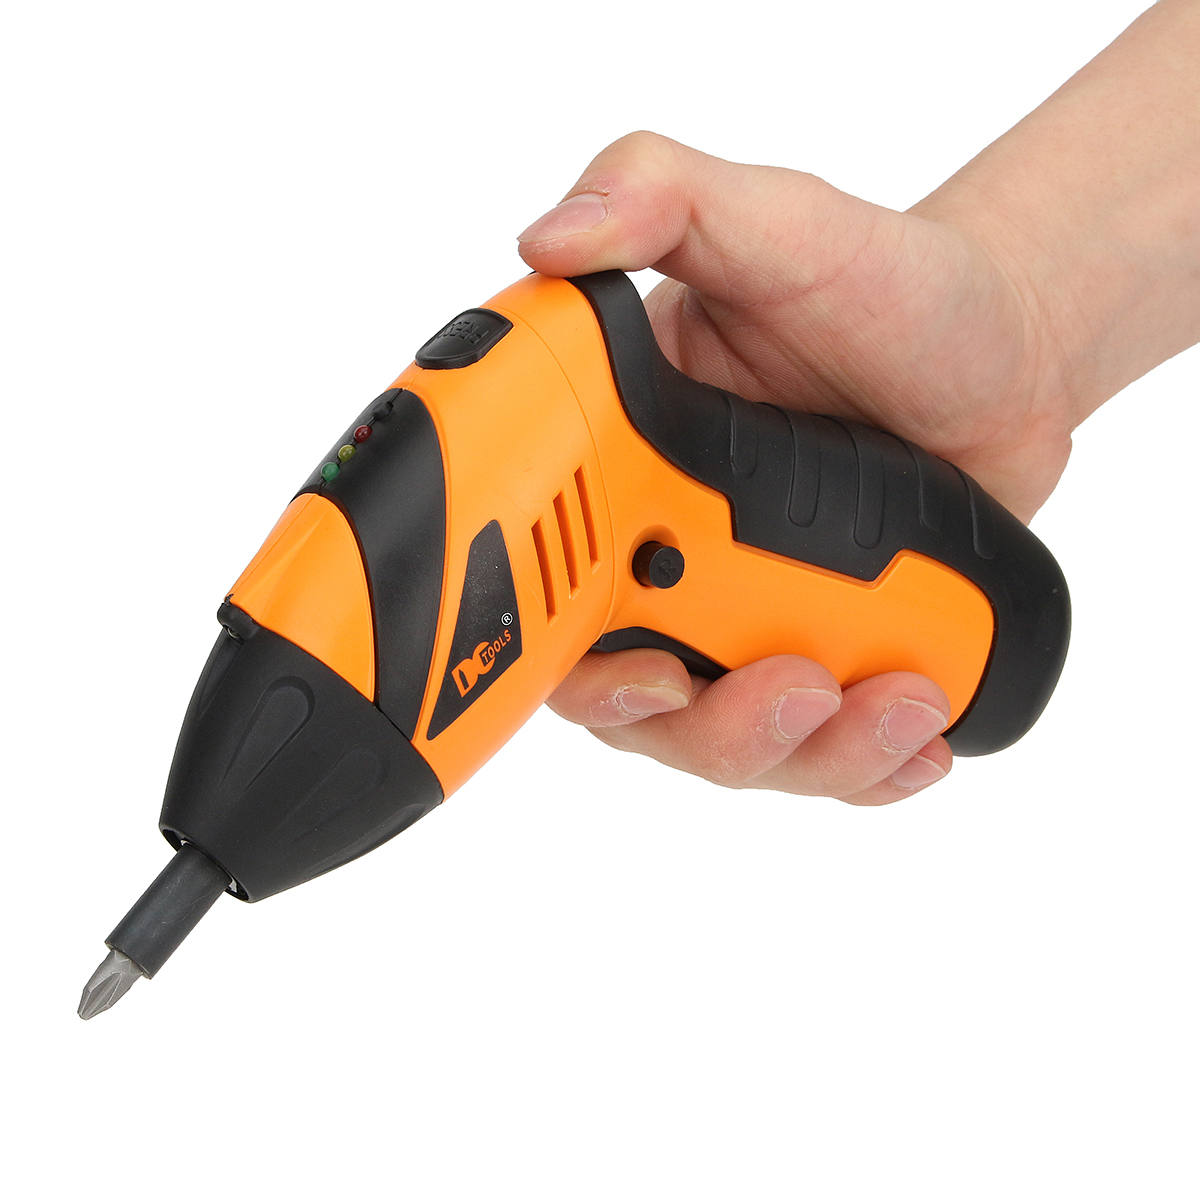 DCTOOLS-45-In-1-Non-slip-Electric-Drill-Cordless-Screwdriver-Foldable-with-US-Charger-1145930-5